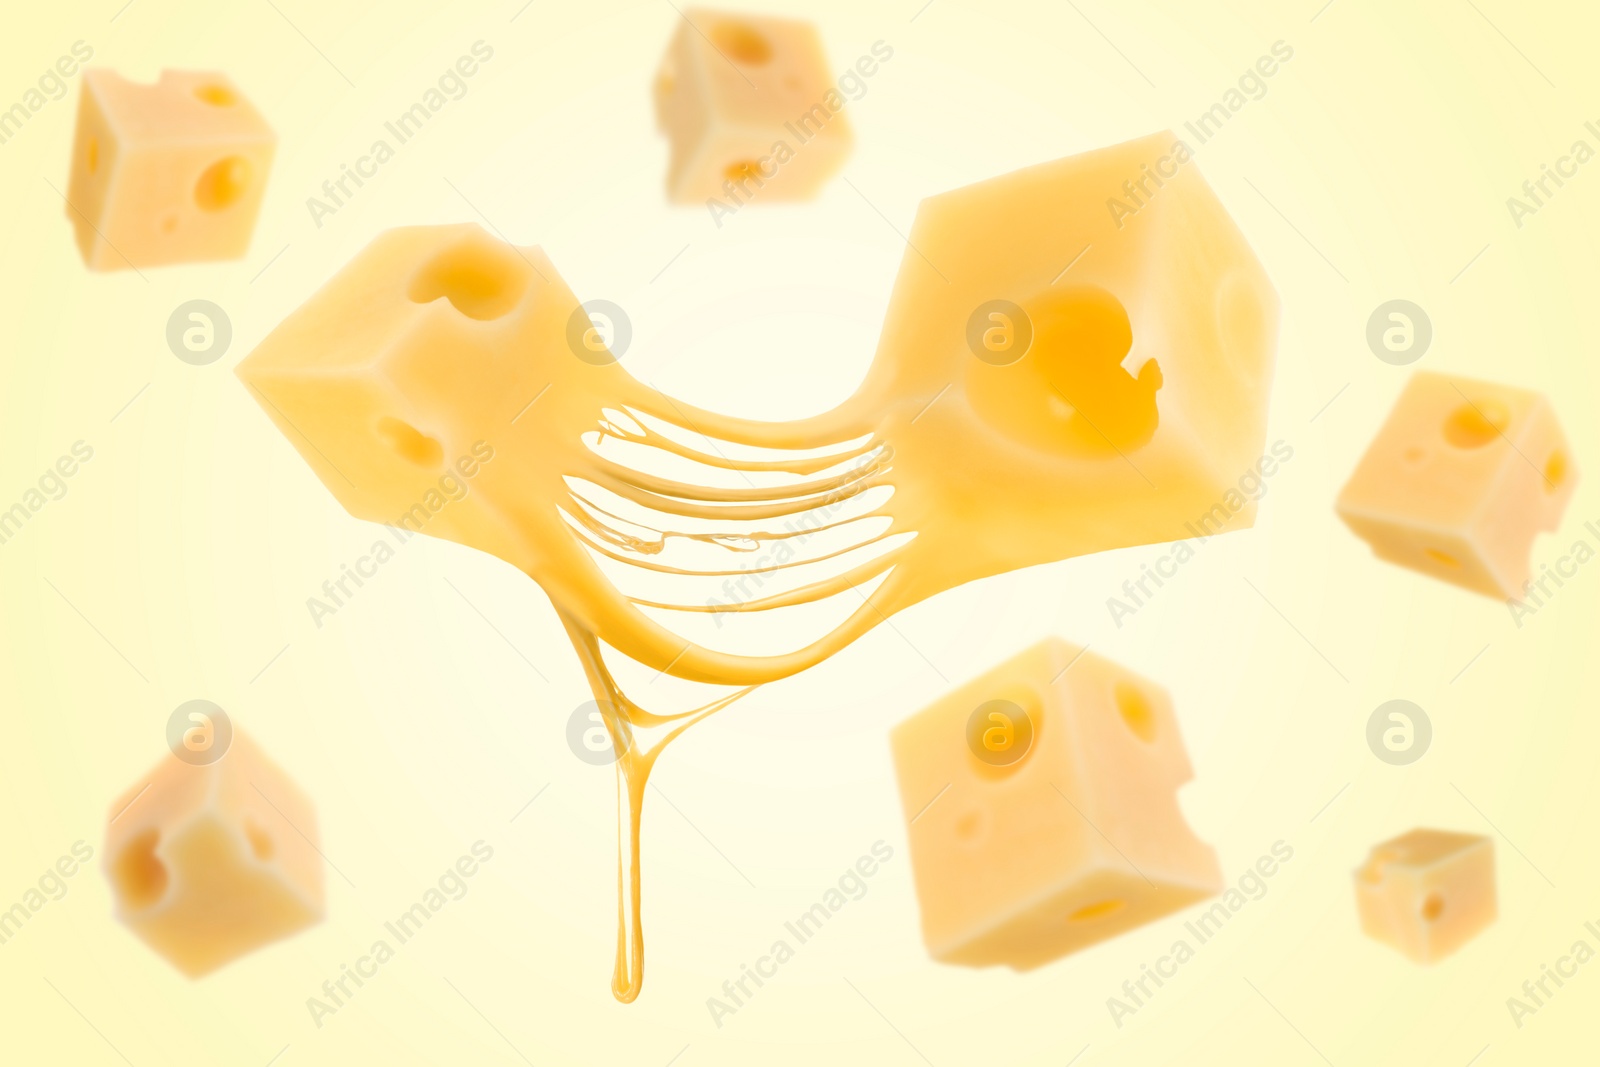 Image of Pieces of cheese falling on yellow background